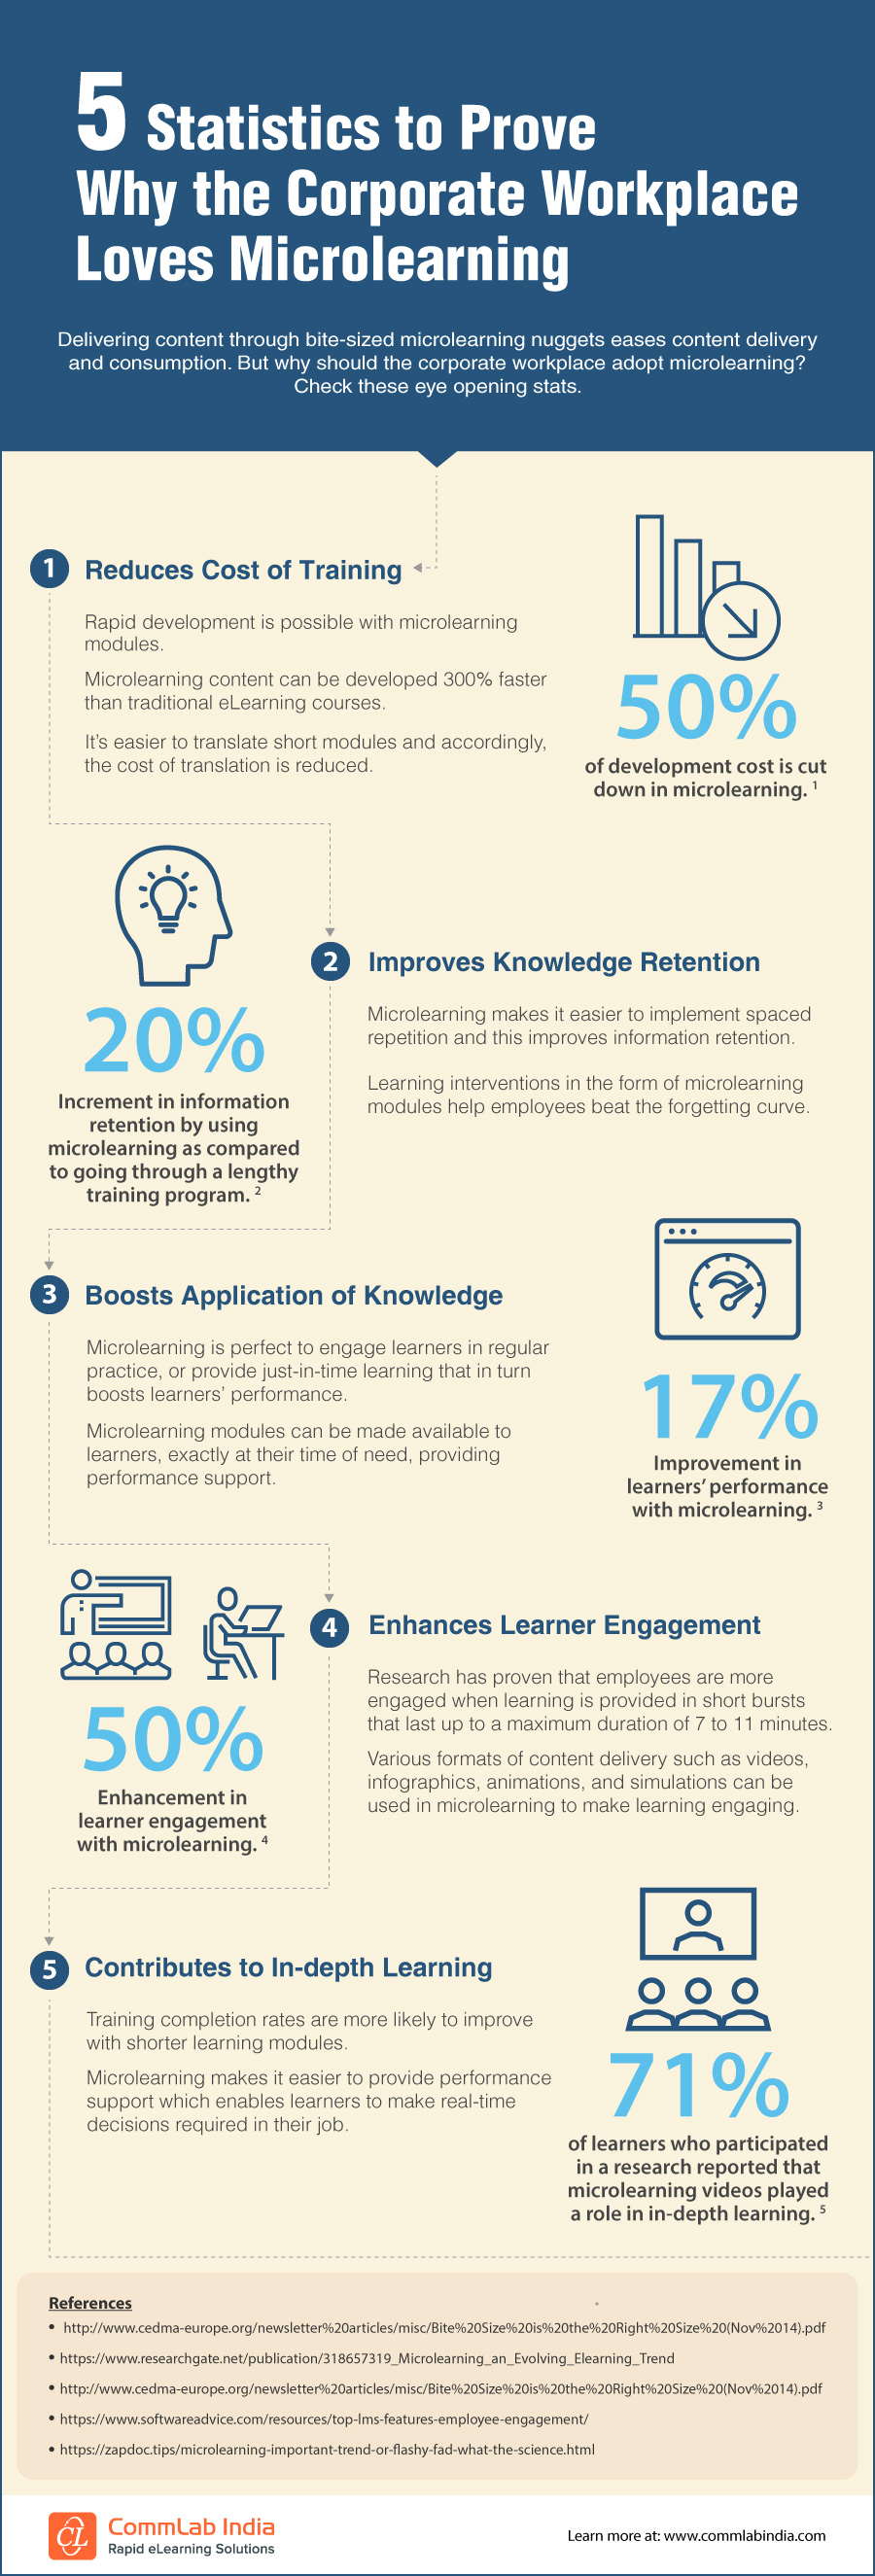 5 Statistics to Prove Why the Corporate Workplace Loves Microlearning [Infographic]